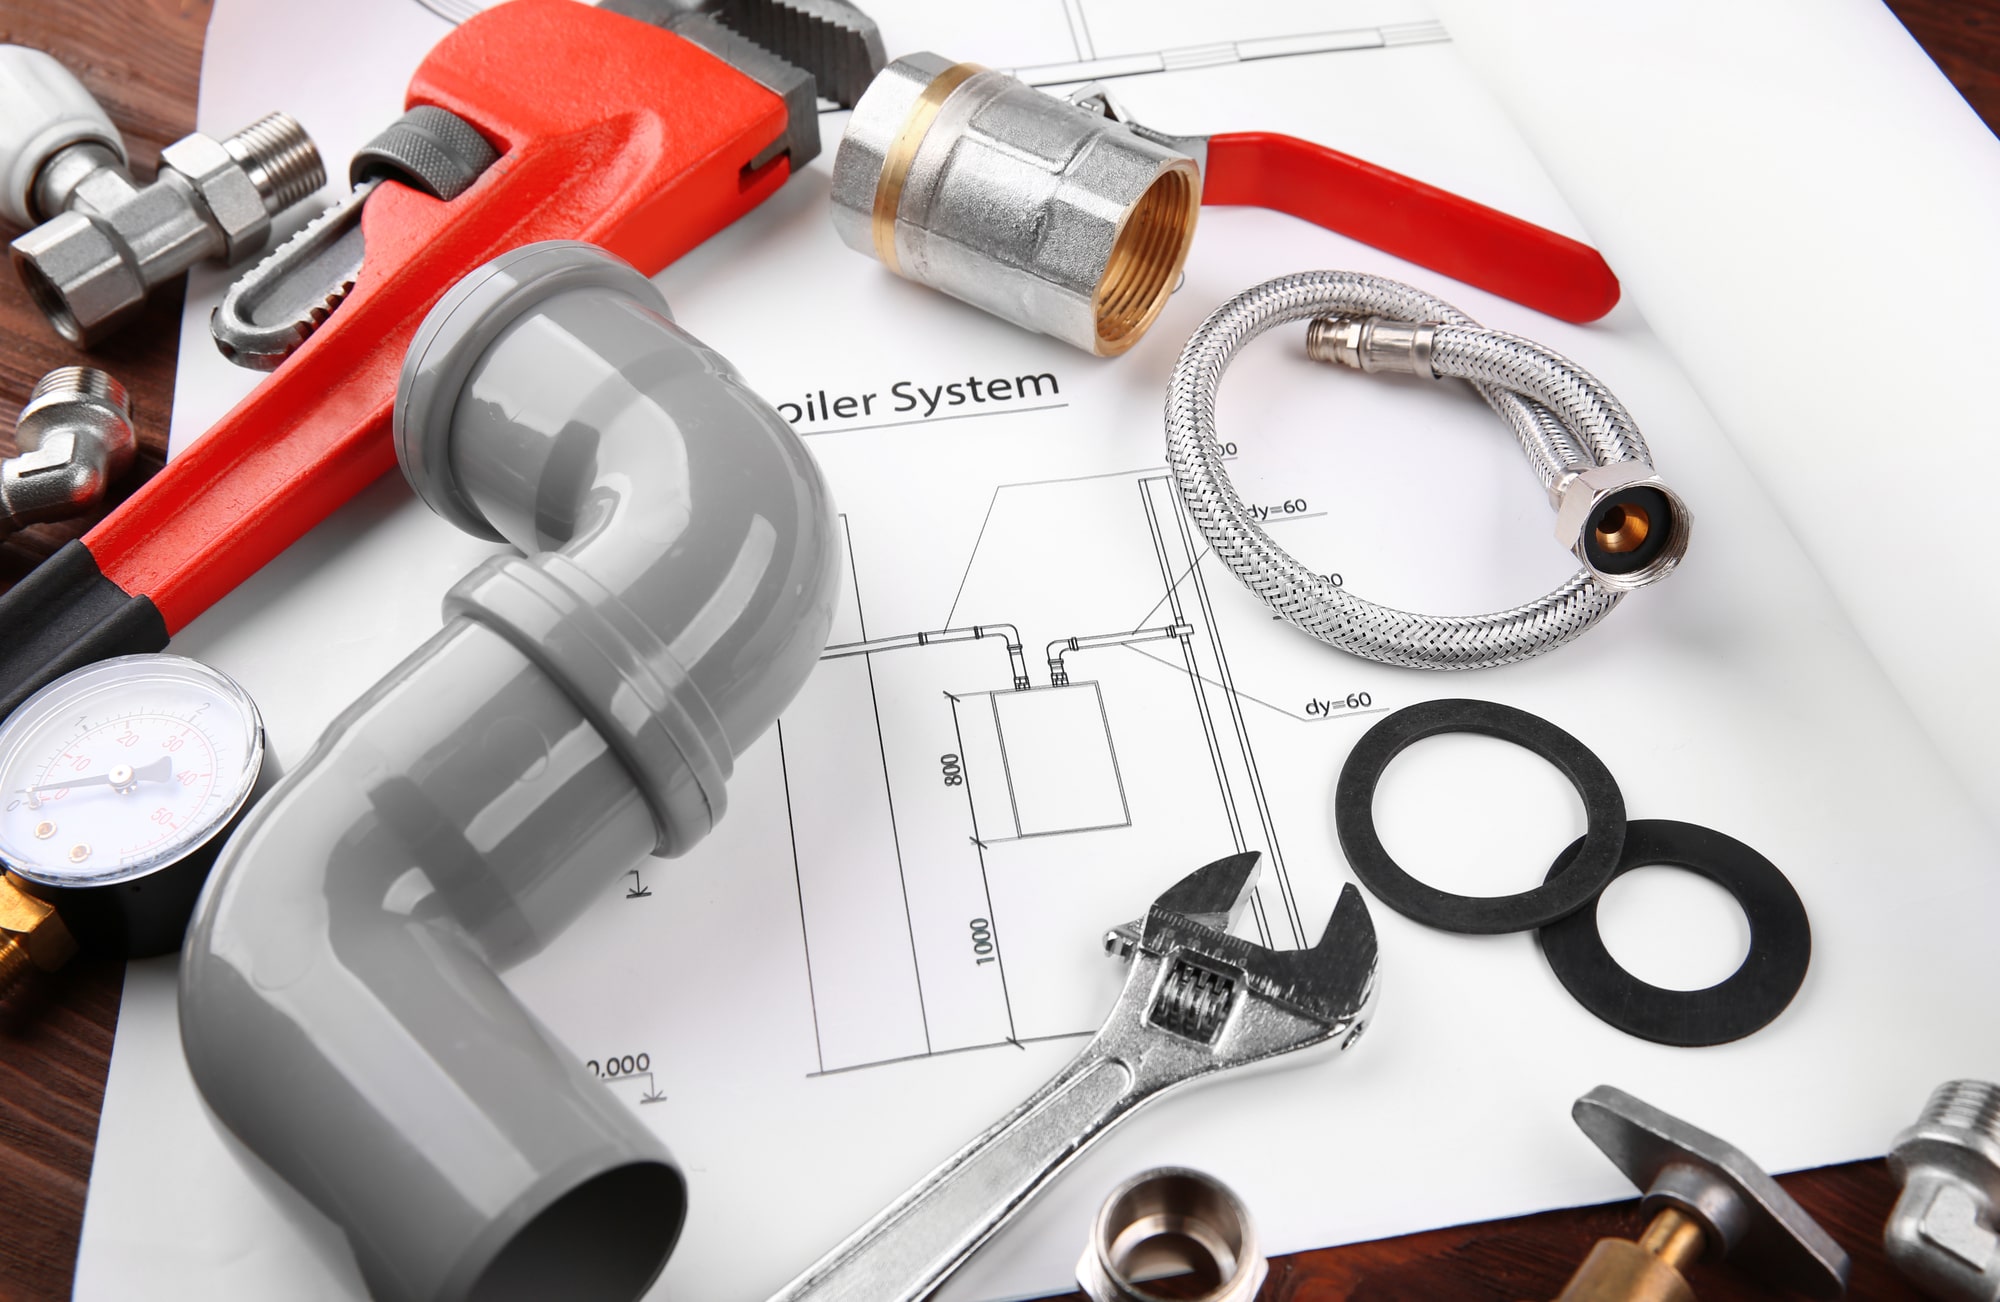 13 Plumbing Tools Every Homeowner Should Have!